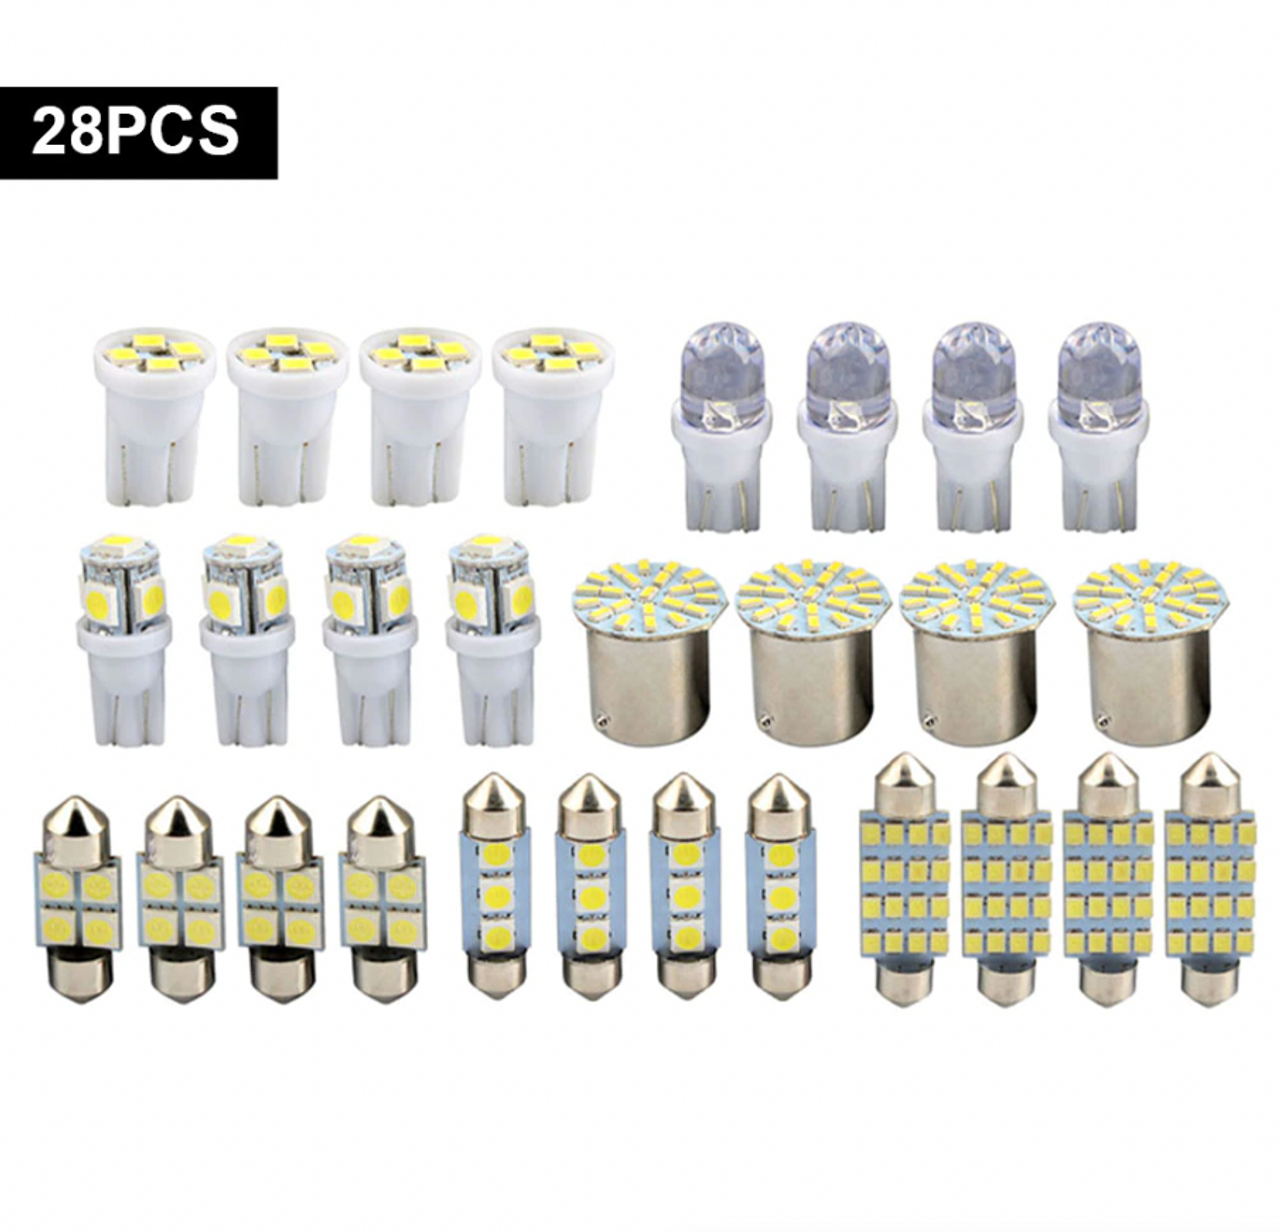 28pcs Car Interior White Combo LED Map Dome Door Trunk License Plate Light Bulbs